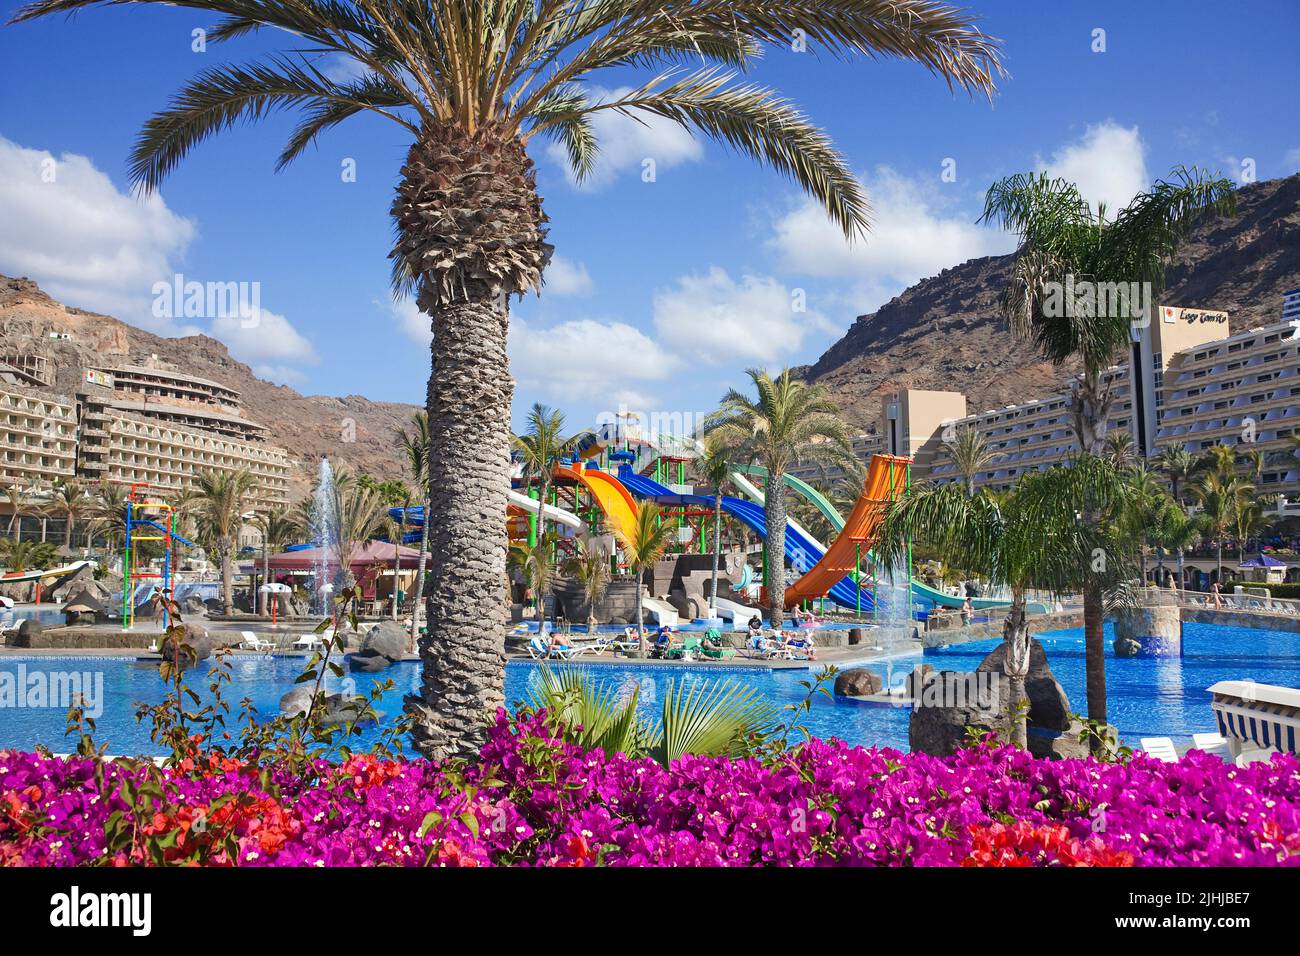 Hotel pool with water slides, hotel in Taurito, Grand Canary, Canary islands, Spain, Europe Stock Photo